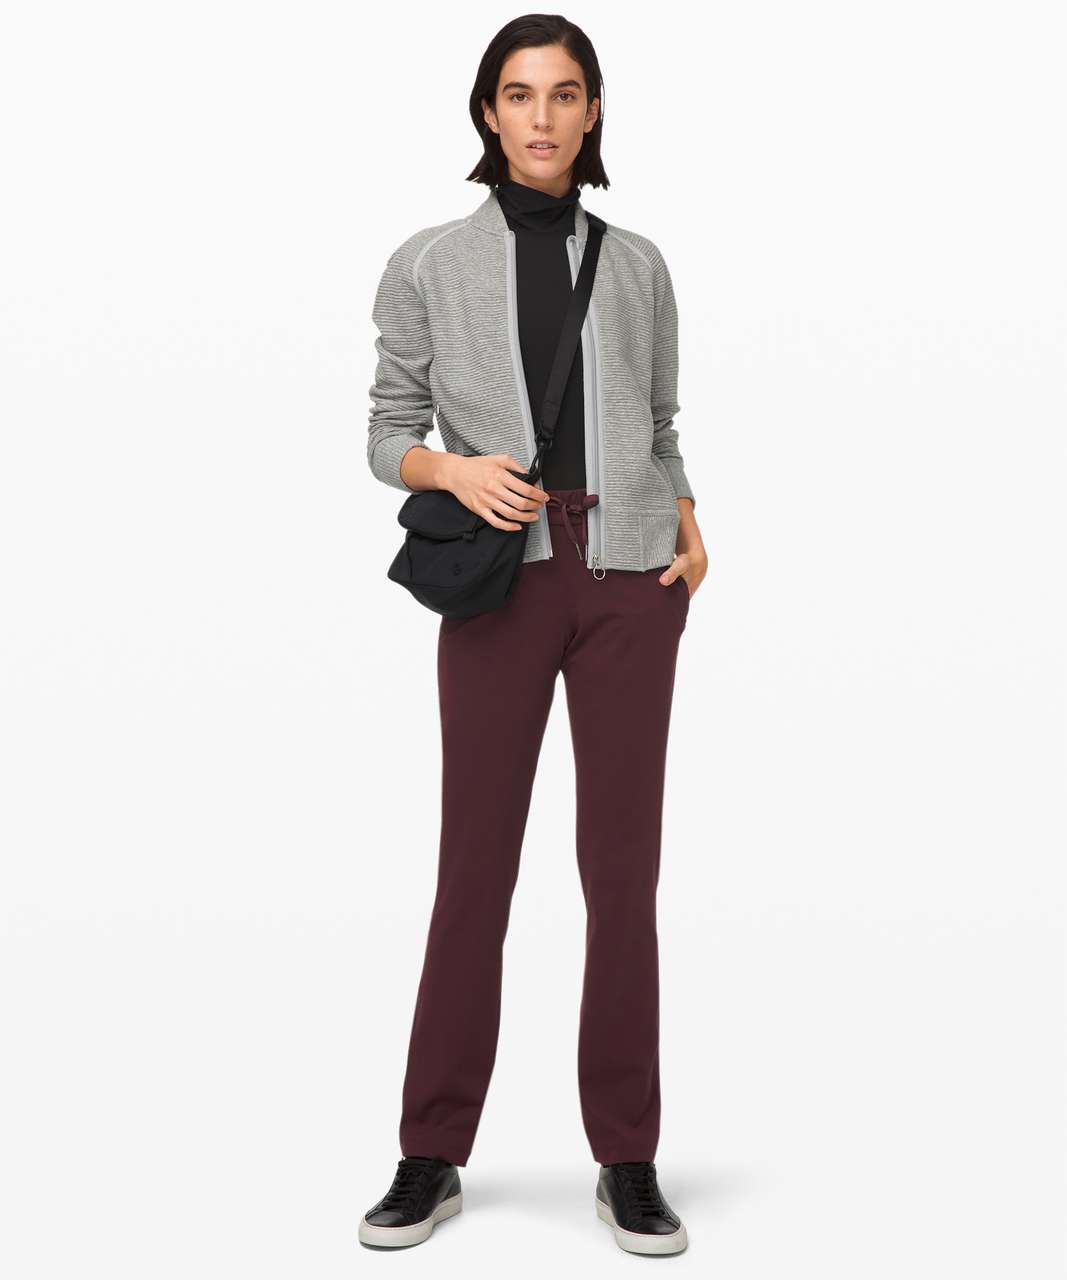 Lululemon On the Fly Pant Tall 33" - Cassis